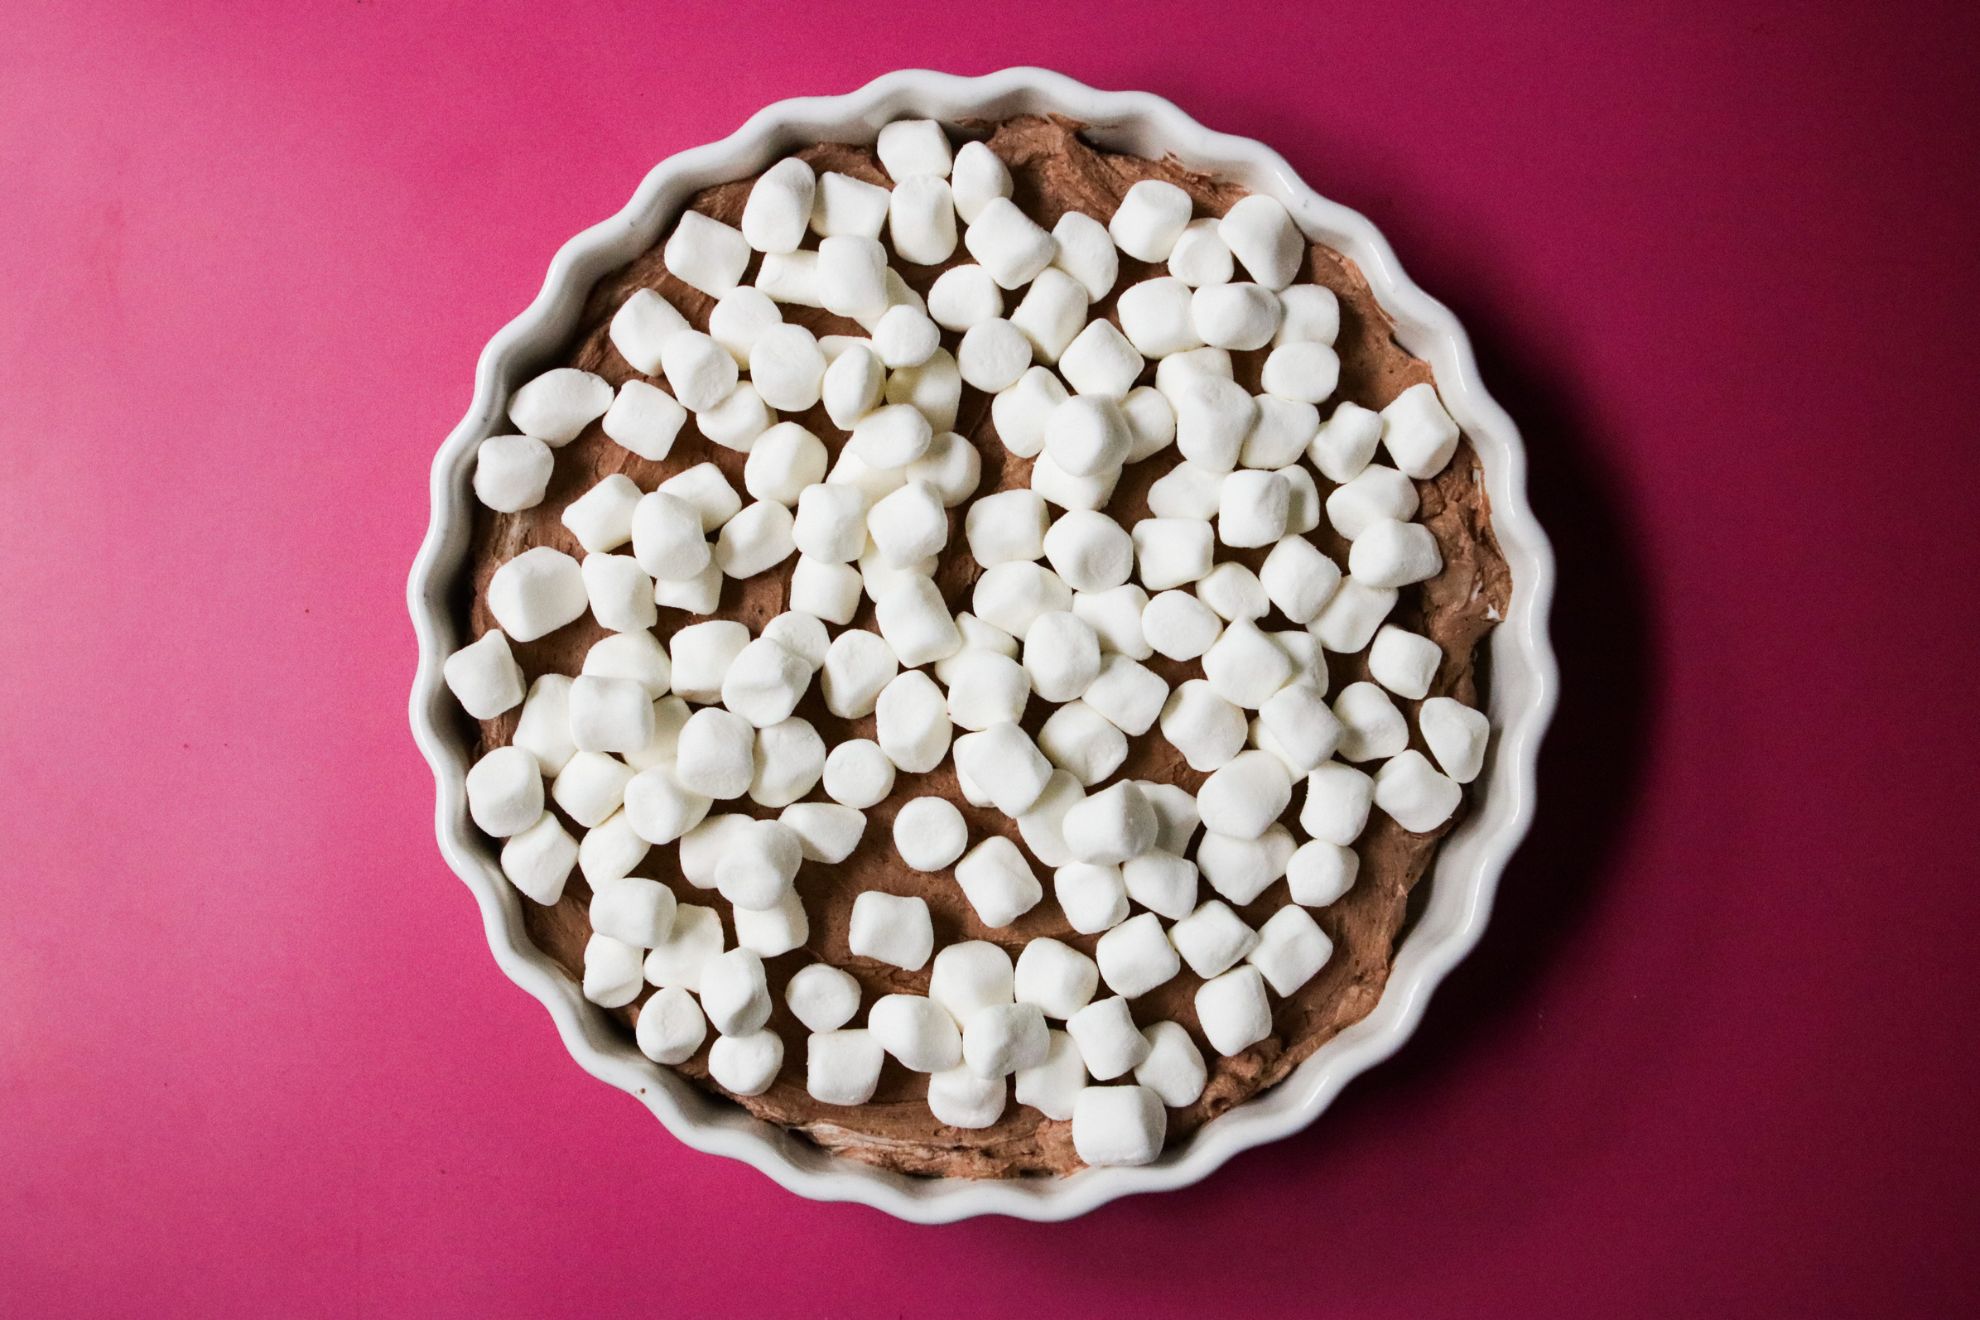 This is an overhead horizontal image of a white ceramic scalloped pie dish sitting on a deep pink surface. In the pie dish is a chocolate mousse spread out in an even layer across the bottom of the dish and topped with mini marshmallows.